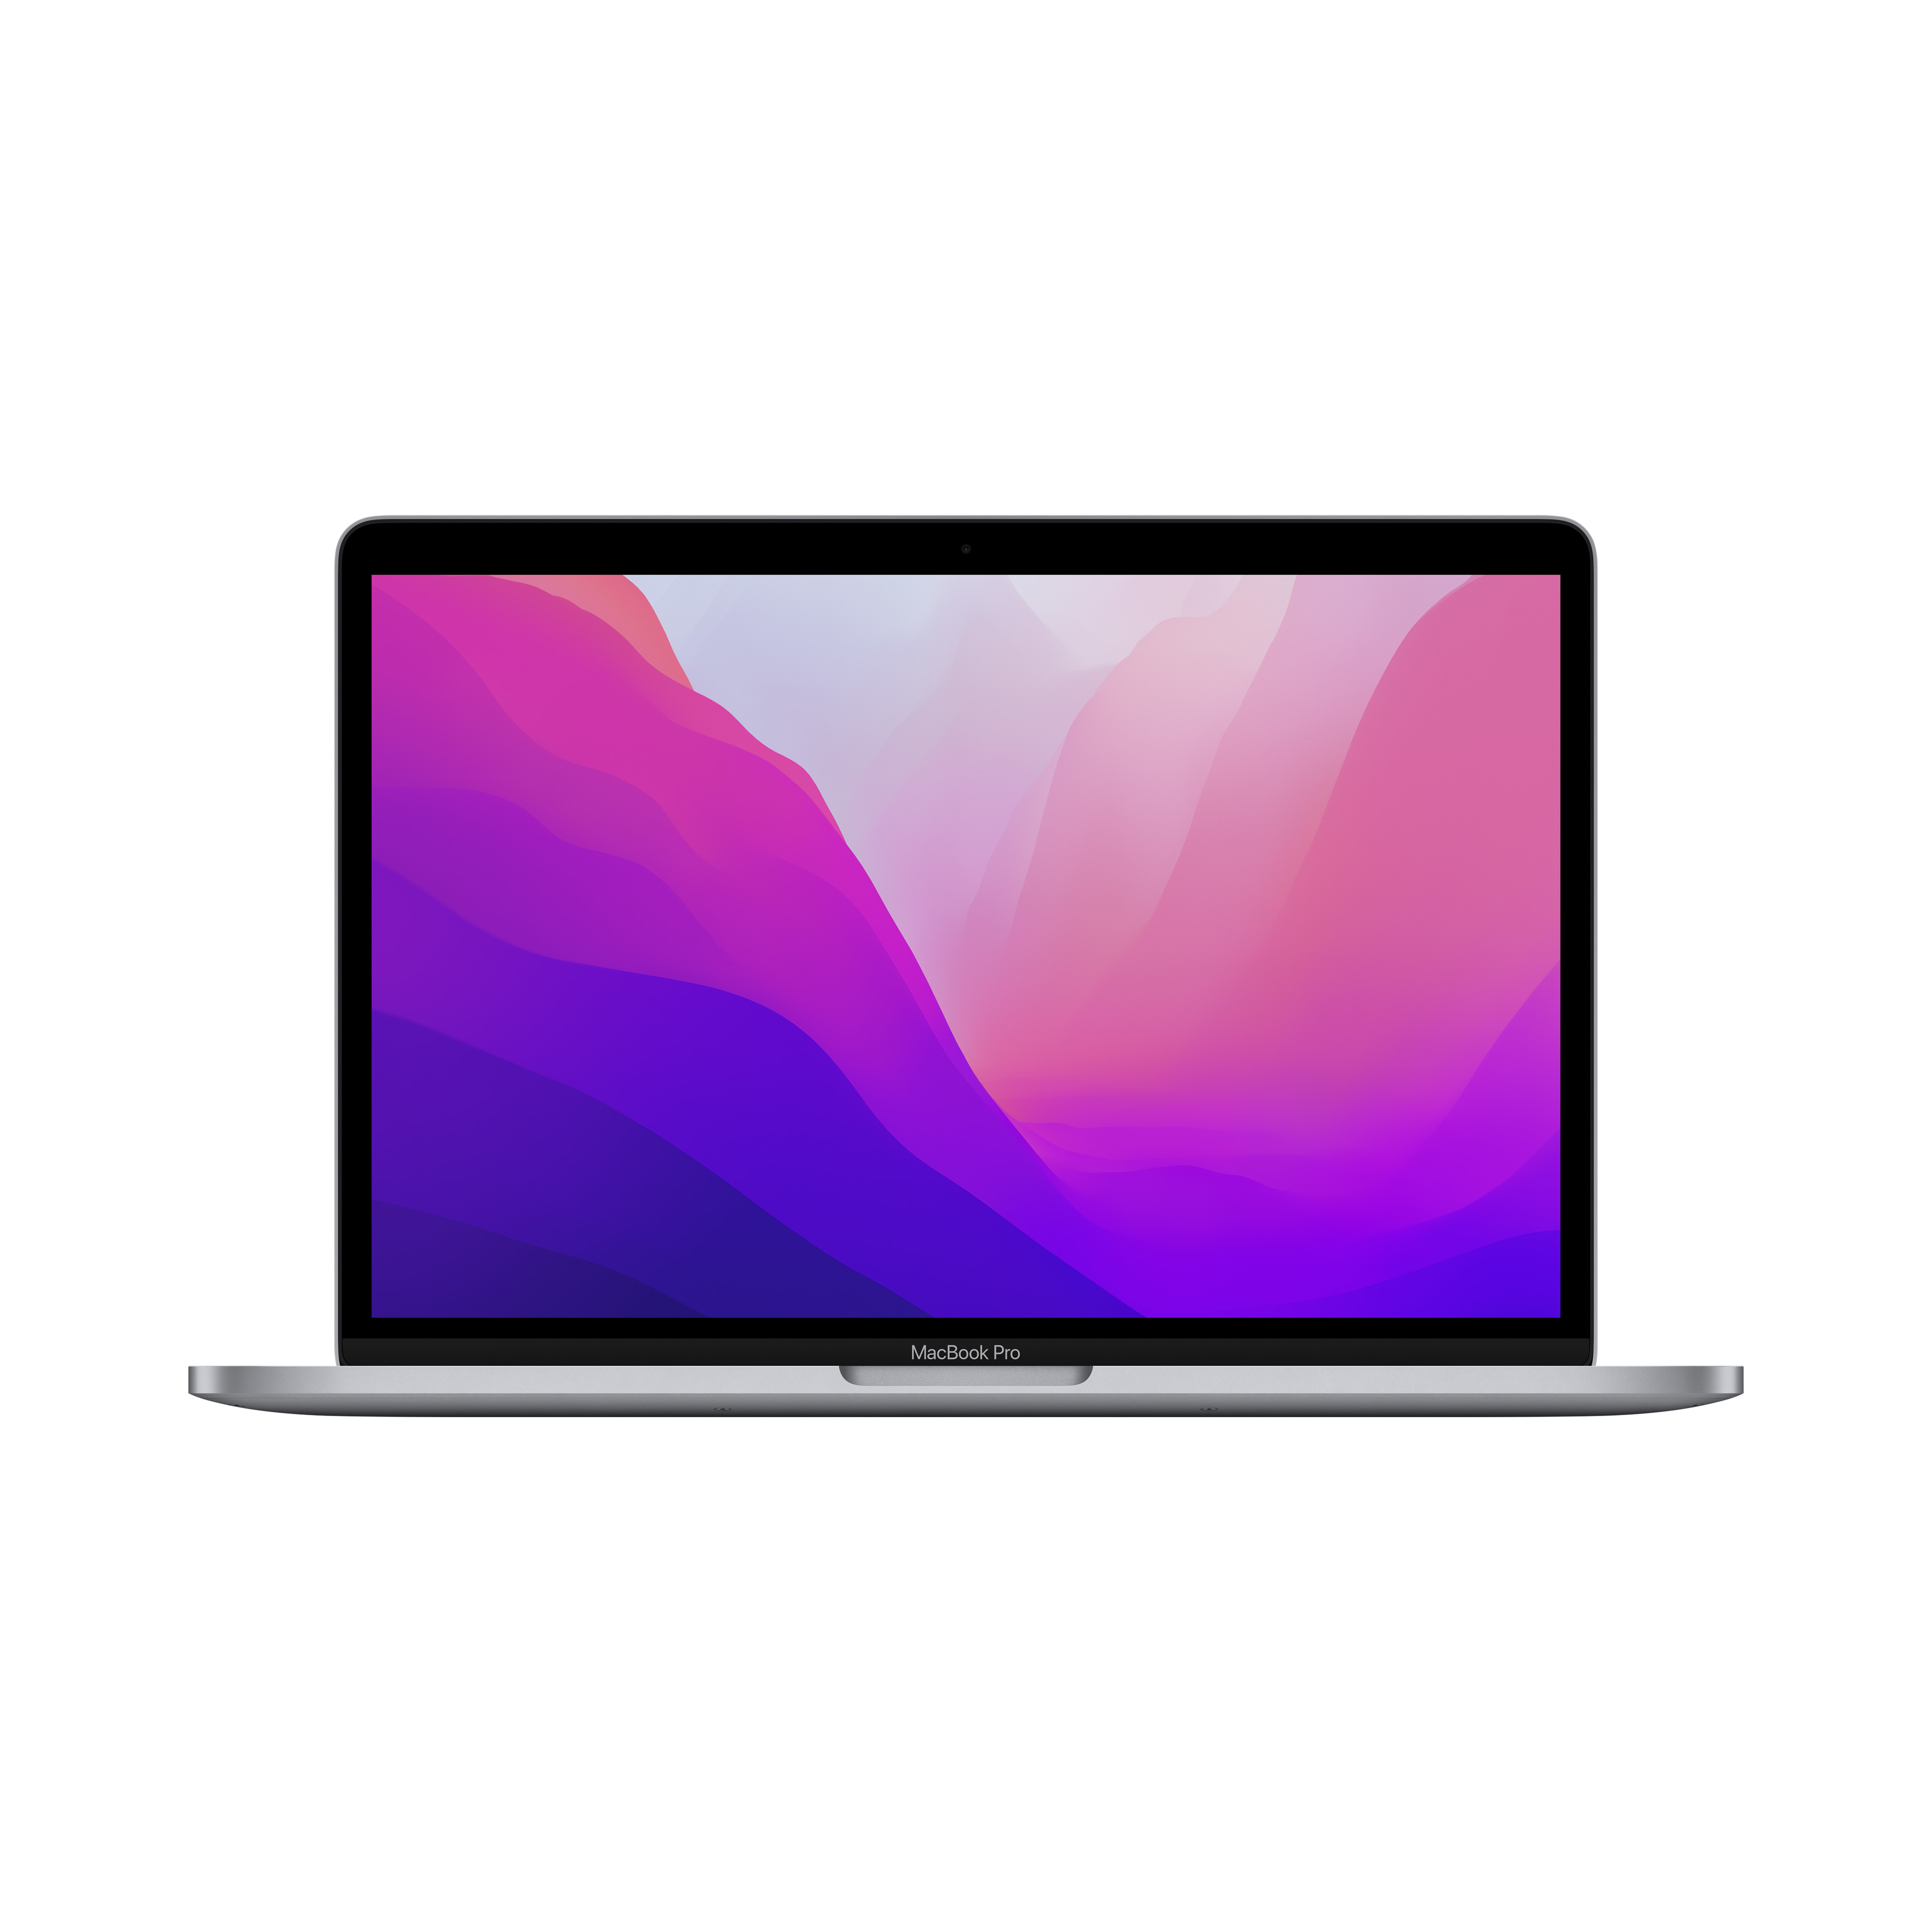  13inch (2022) MacBook Pro:  M2 chip with 8core CPU and 10core GPU, 256GB SSD Space Grey Qwerty